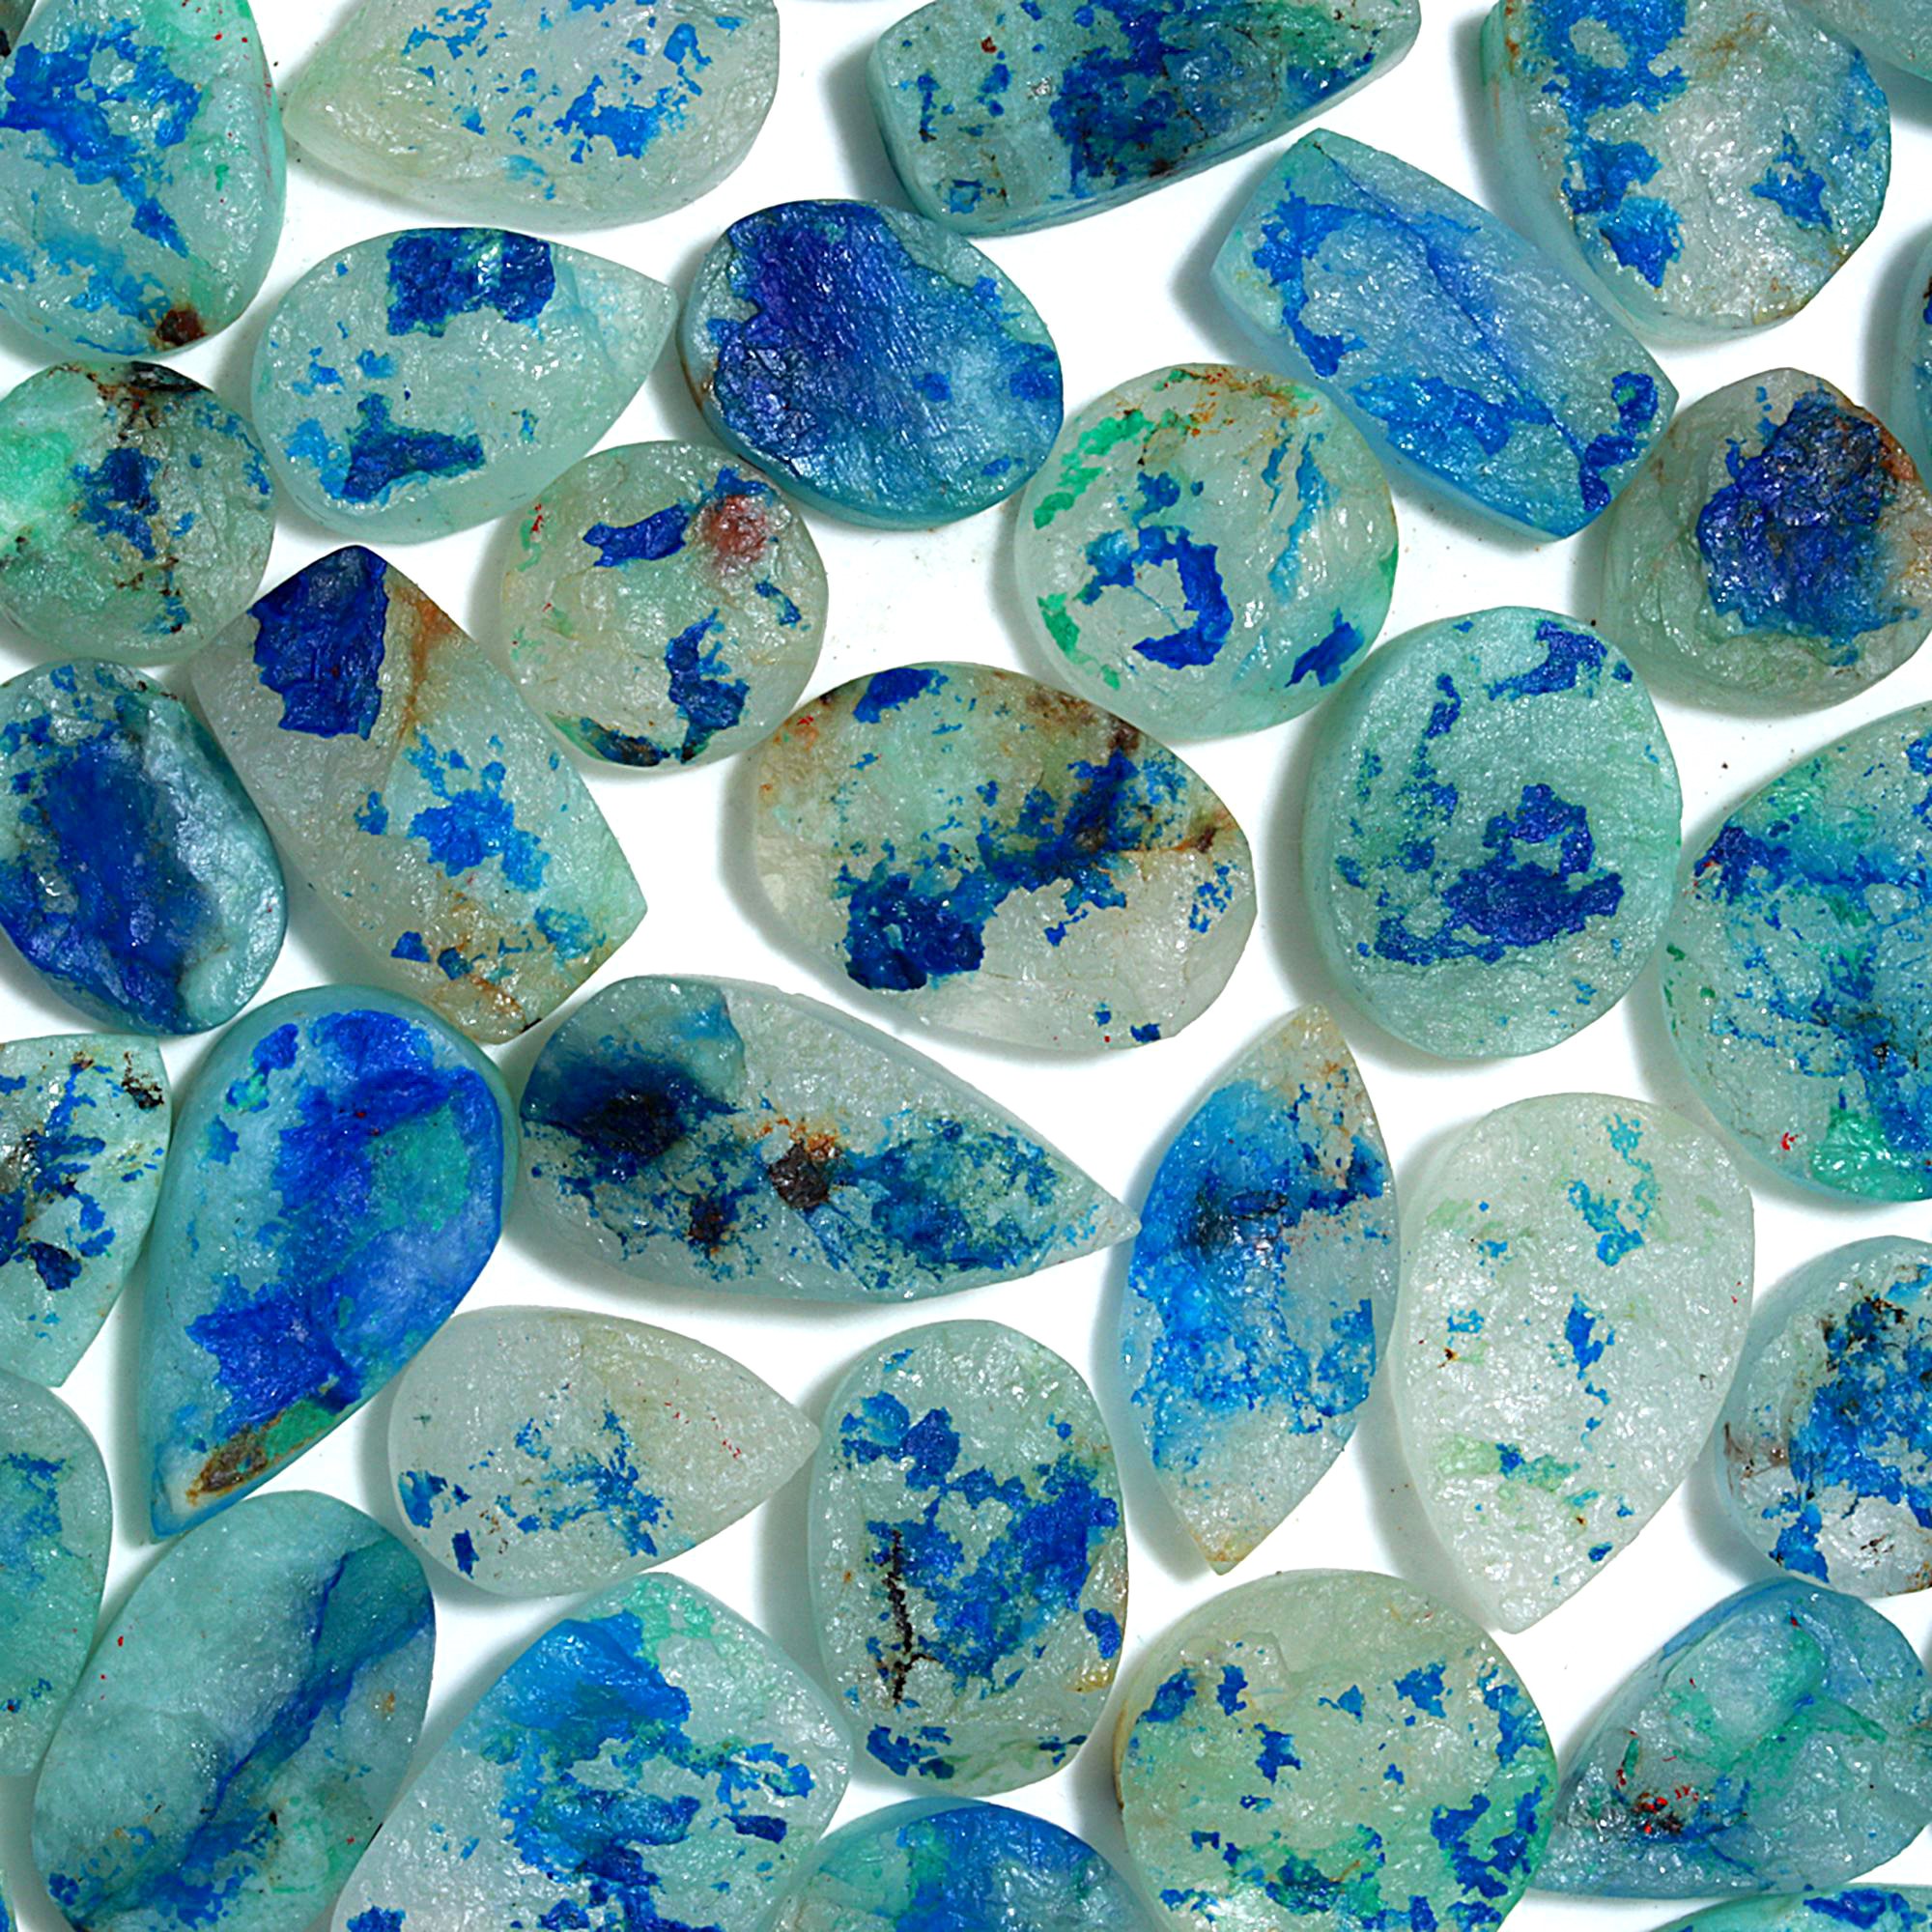 48 Pcs 573.Cts Natural Azurite Druzy Unpolished Loose Cabochon Gemstone For Jewelry Wholesale Lot Size 27x13 17x12mm#1177